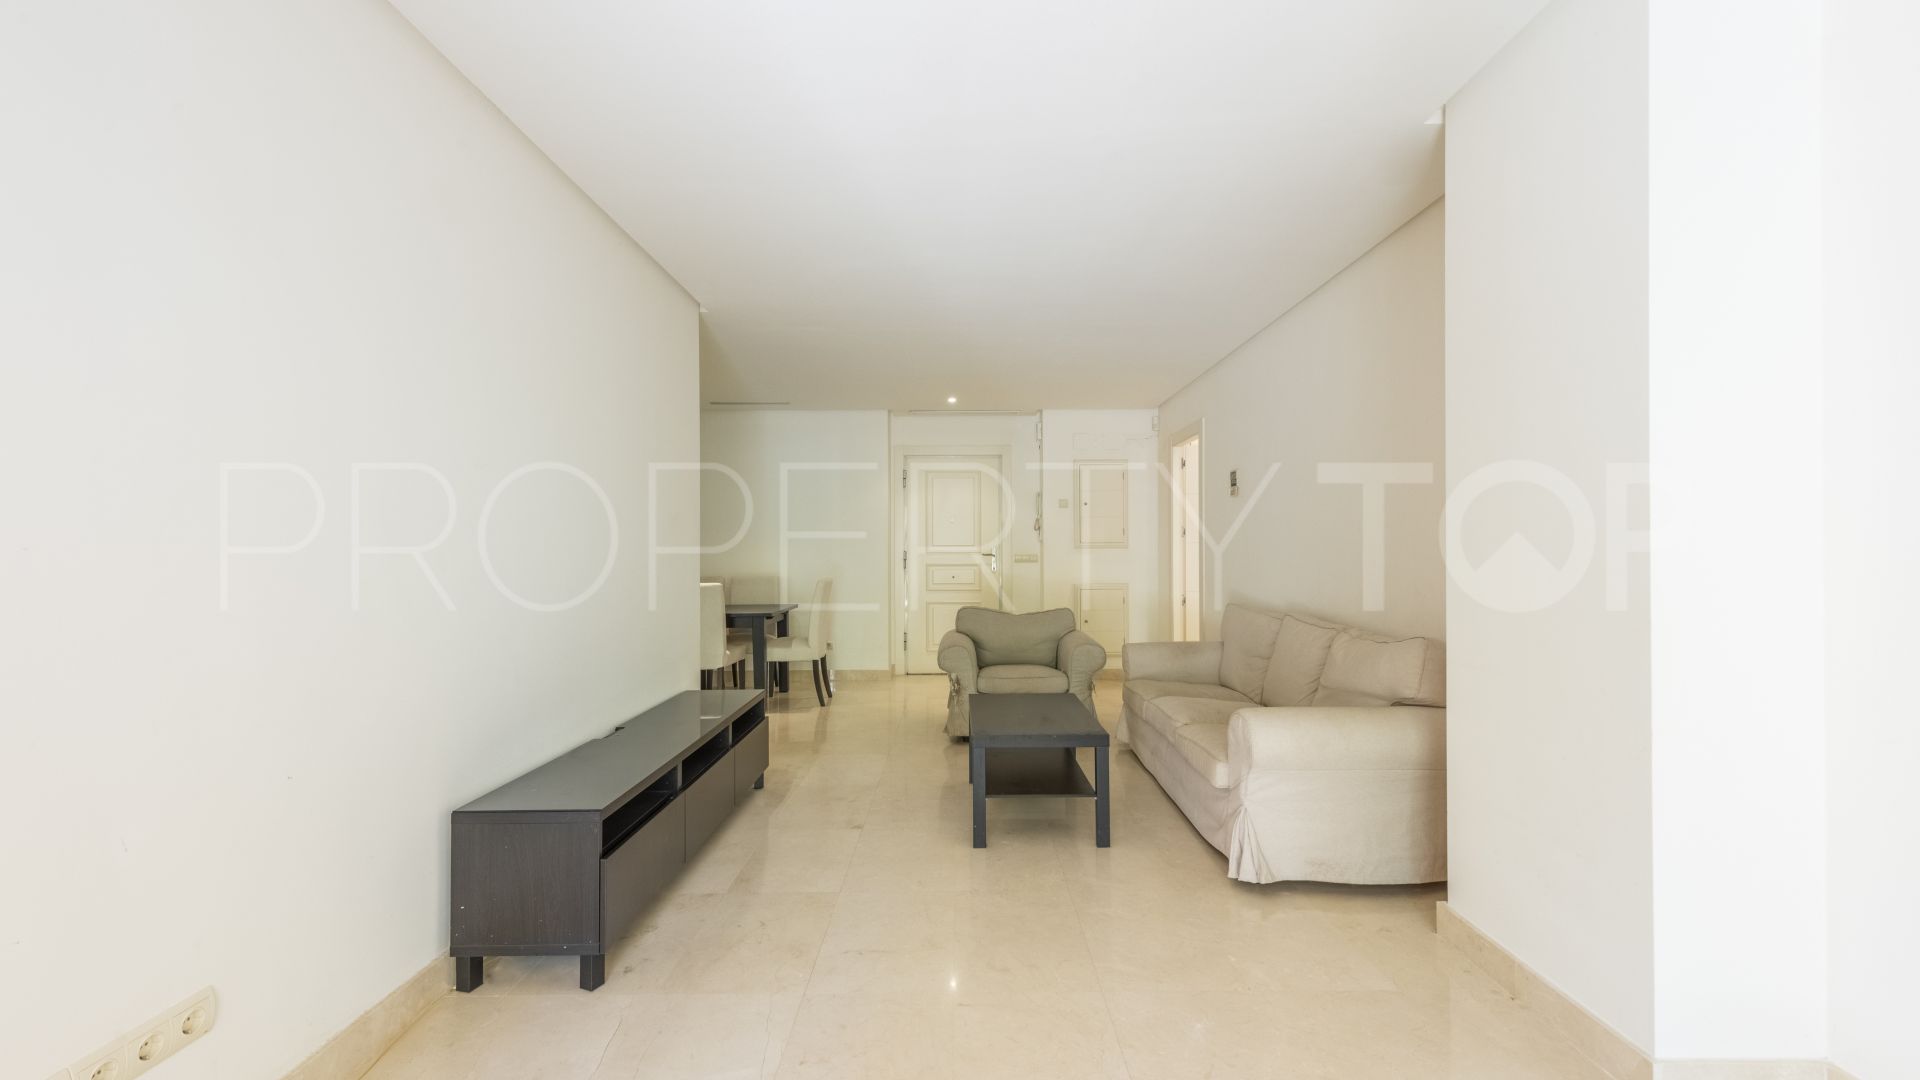 For sale ground floor apartment in Vista Real